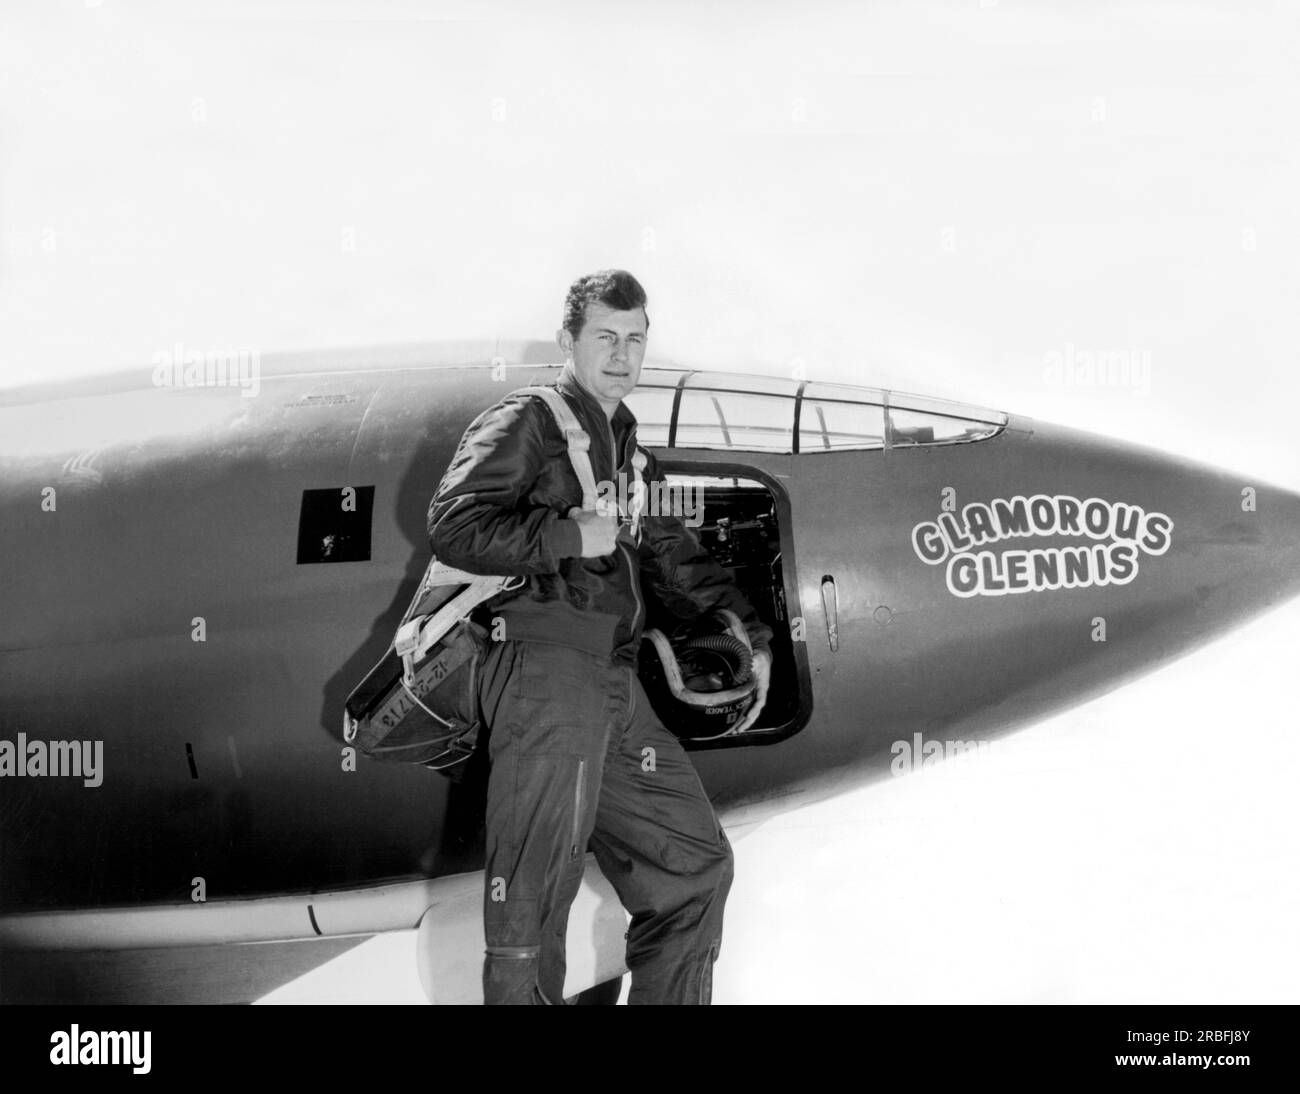 Muroc Army Air Force Base, California:  October, 1947 Capt. Charles E. Yeager standing next to the Air Force's Bell X-1 supersonic research aircraft. Yeager named it the Glamorous Glennis after his wife. He became the first man to fly faster than the speed of sound on Oct. 14, 1947. Stock Photo